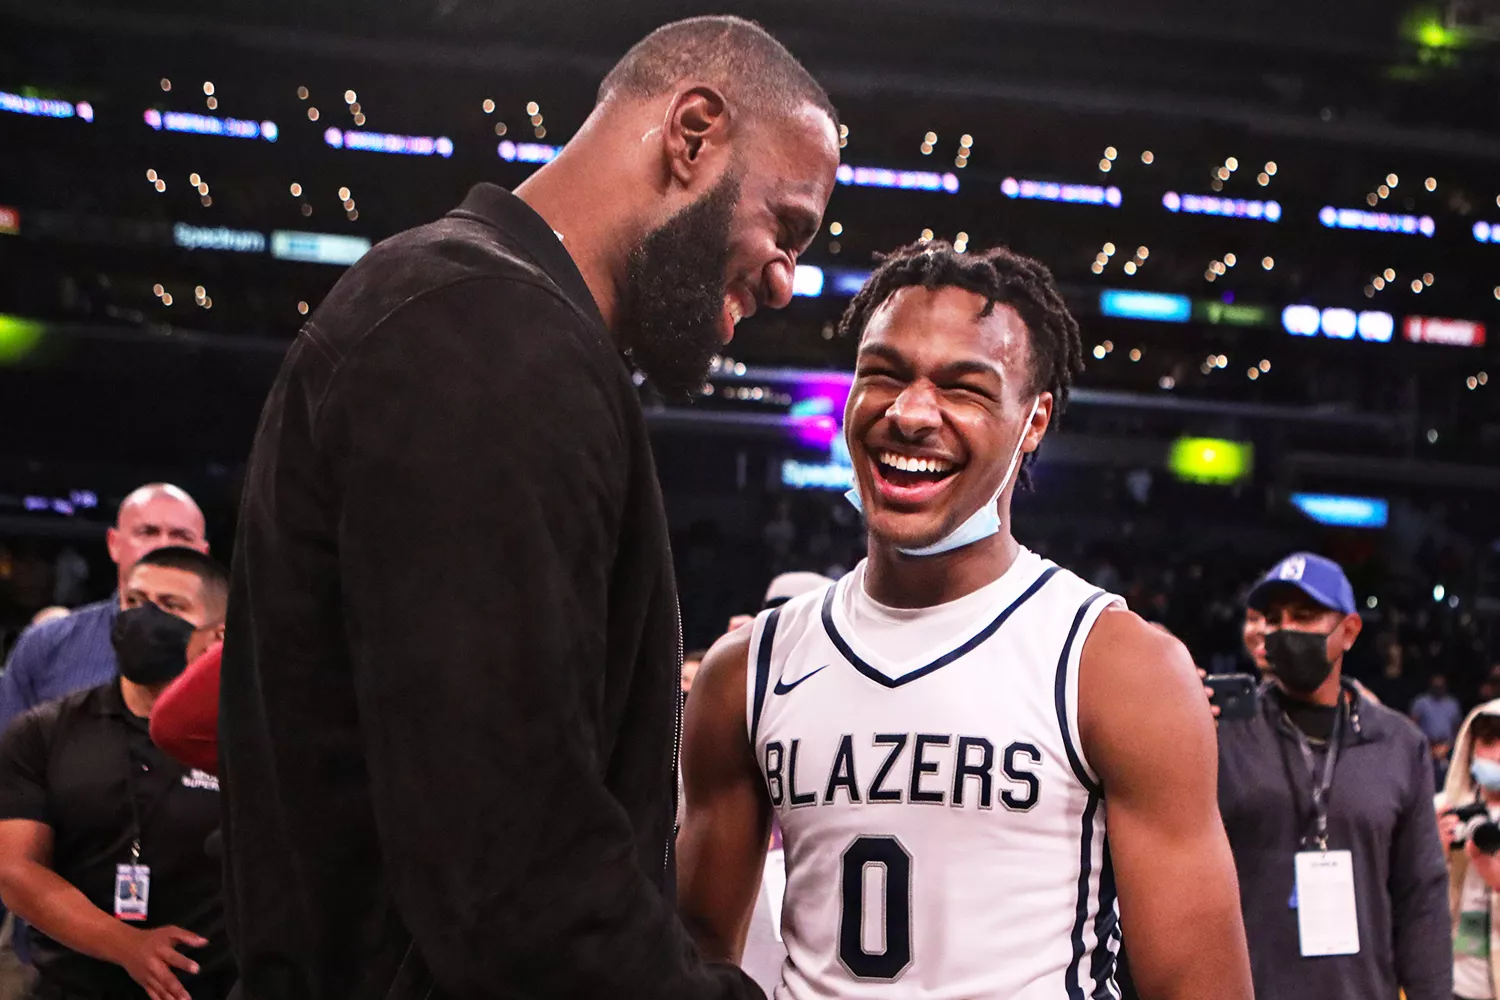 Lebron James comes onto the court to congratulate his son Bronny James (0) point guard for Sierra Canyon after his team won against St. Vincent-St. Mary during The Chosen - 1's Invitational High School Basketball Showcase at the Staples Center on Saturday, Dec. 4, 2021 in Los Angeles, CA.